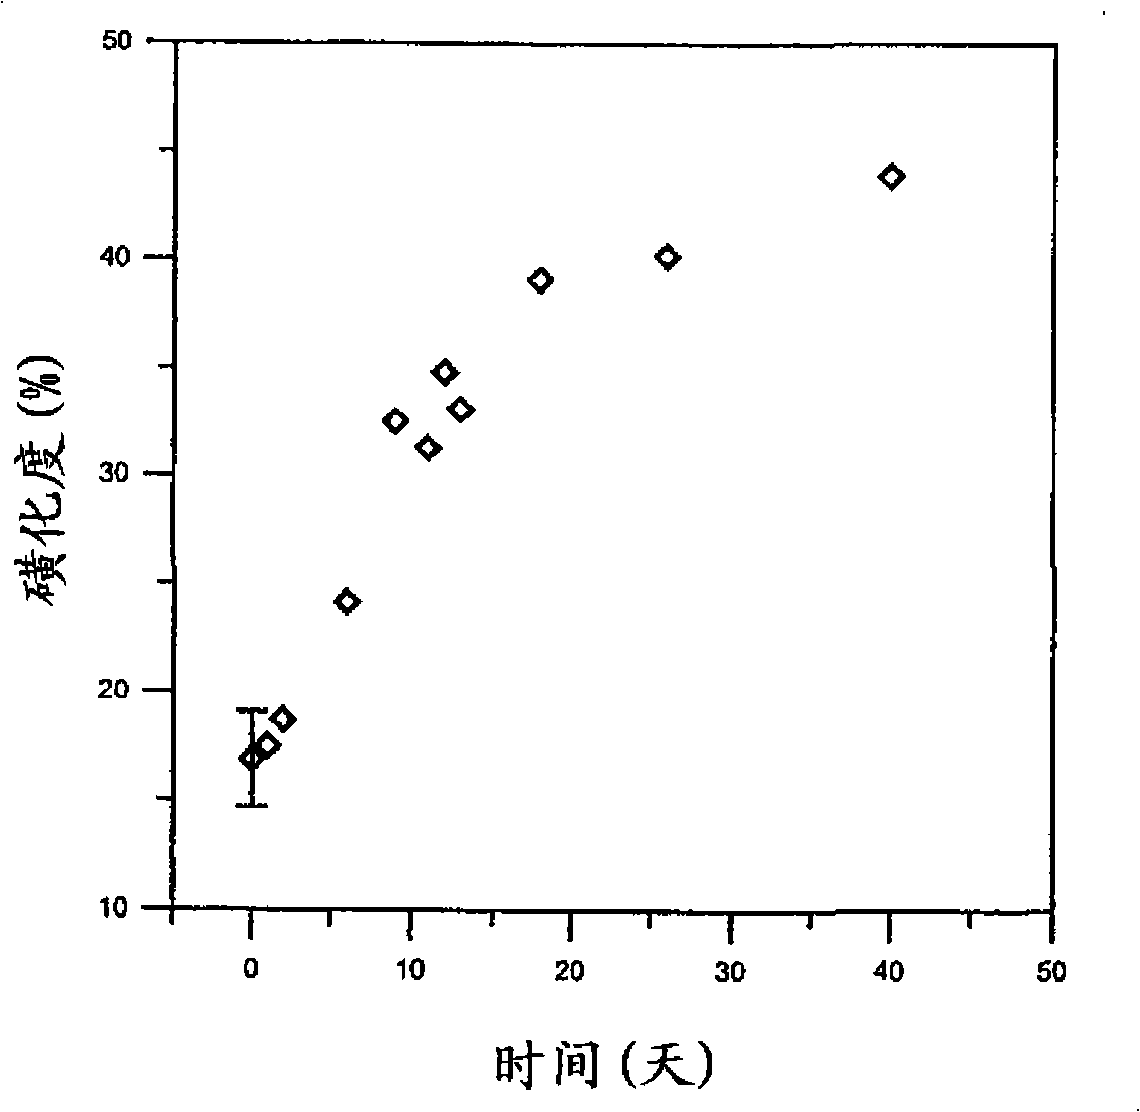 Method for manufacturing a sulfonated poly(1,3,4-oxadiazol) polymer